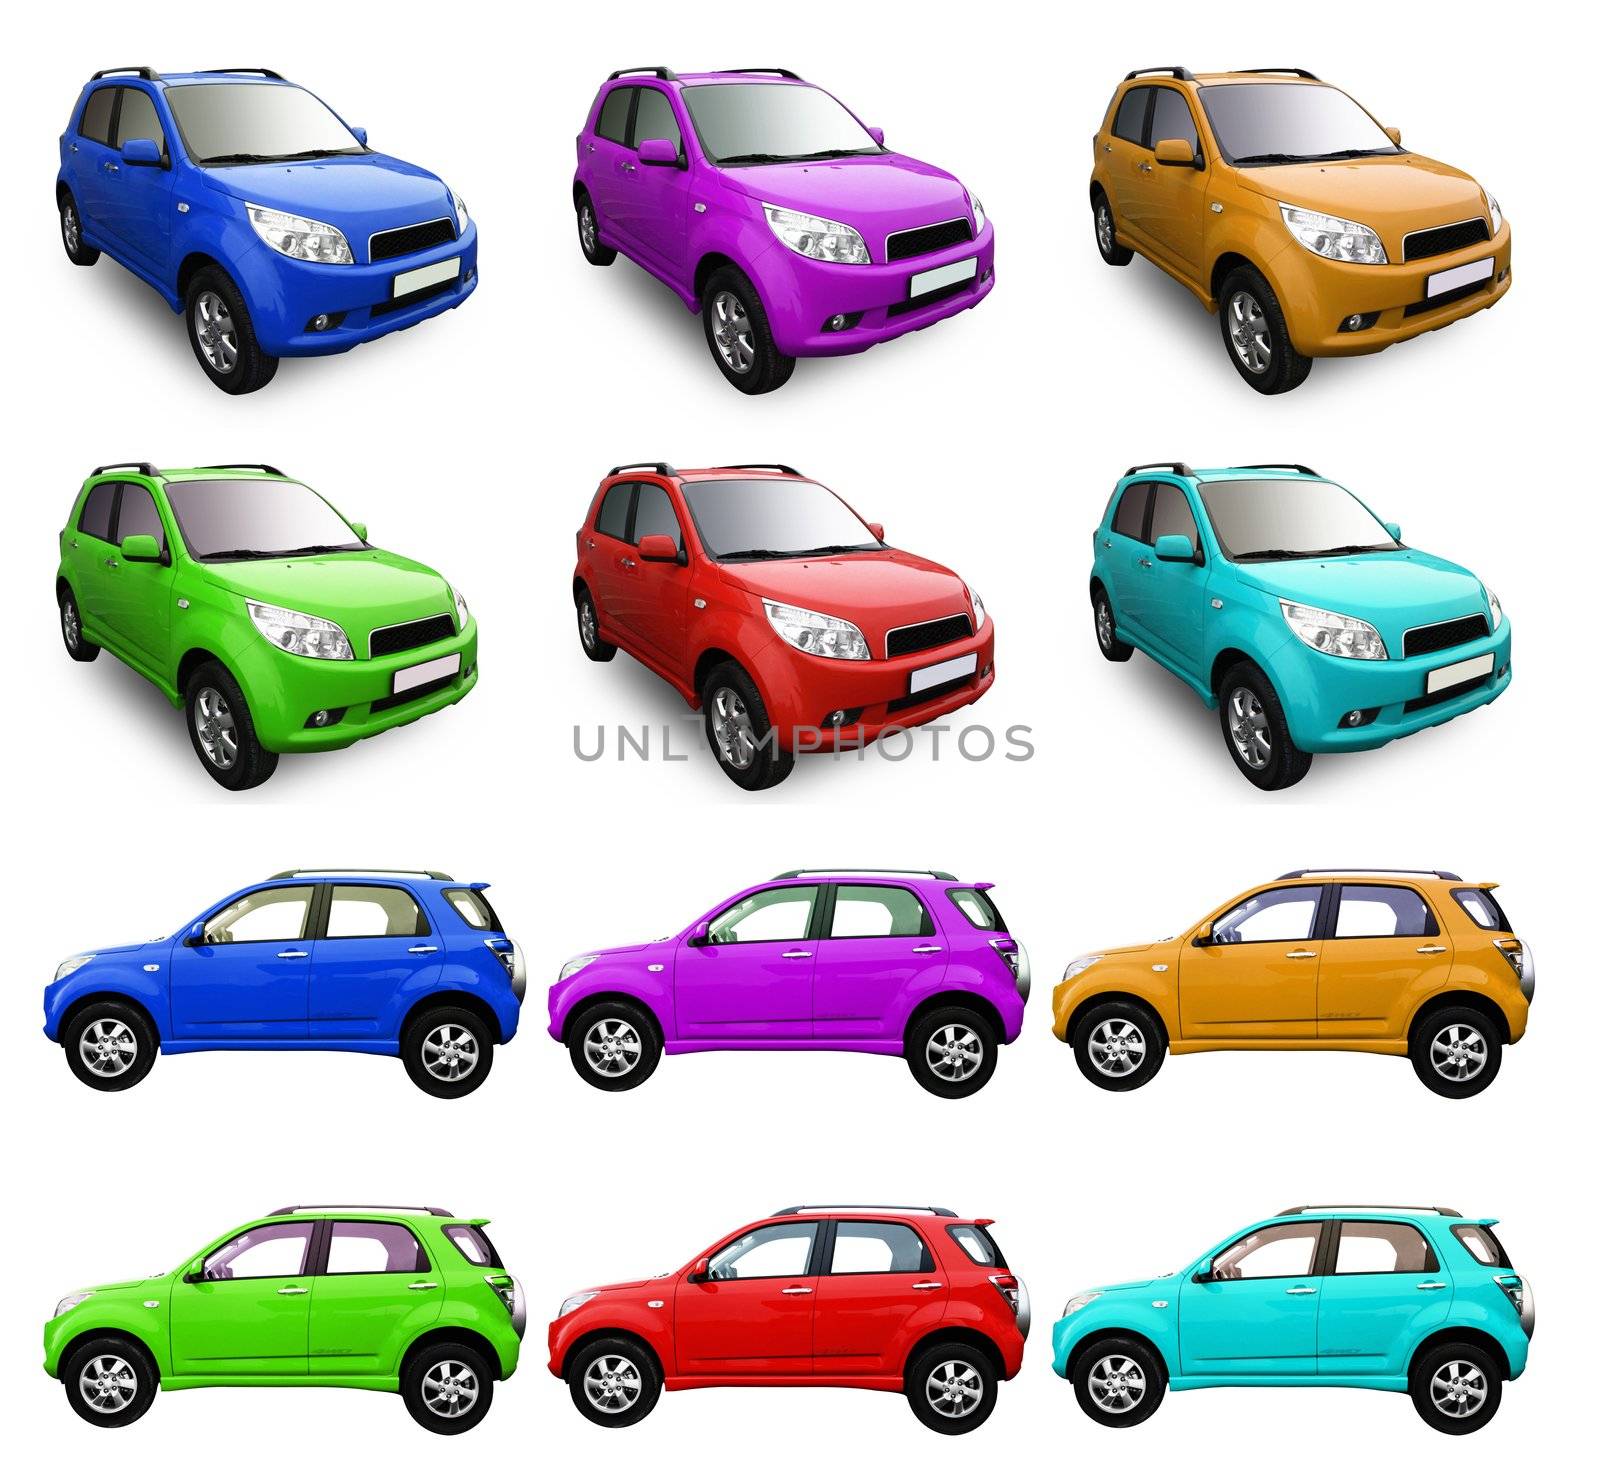 Cars isolated on white in different color, front and side views.